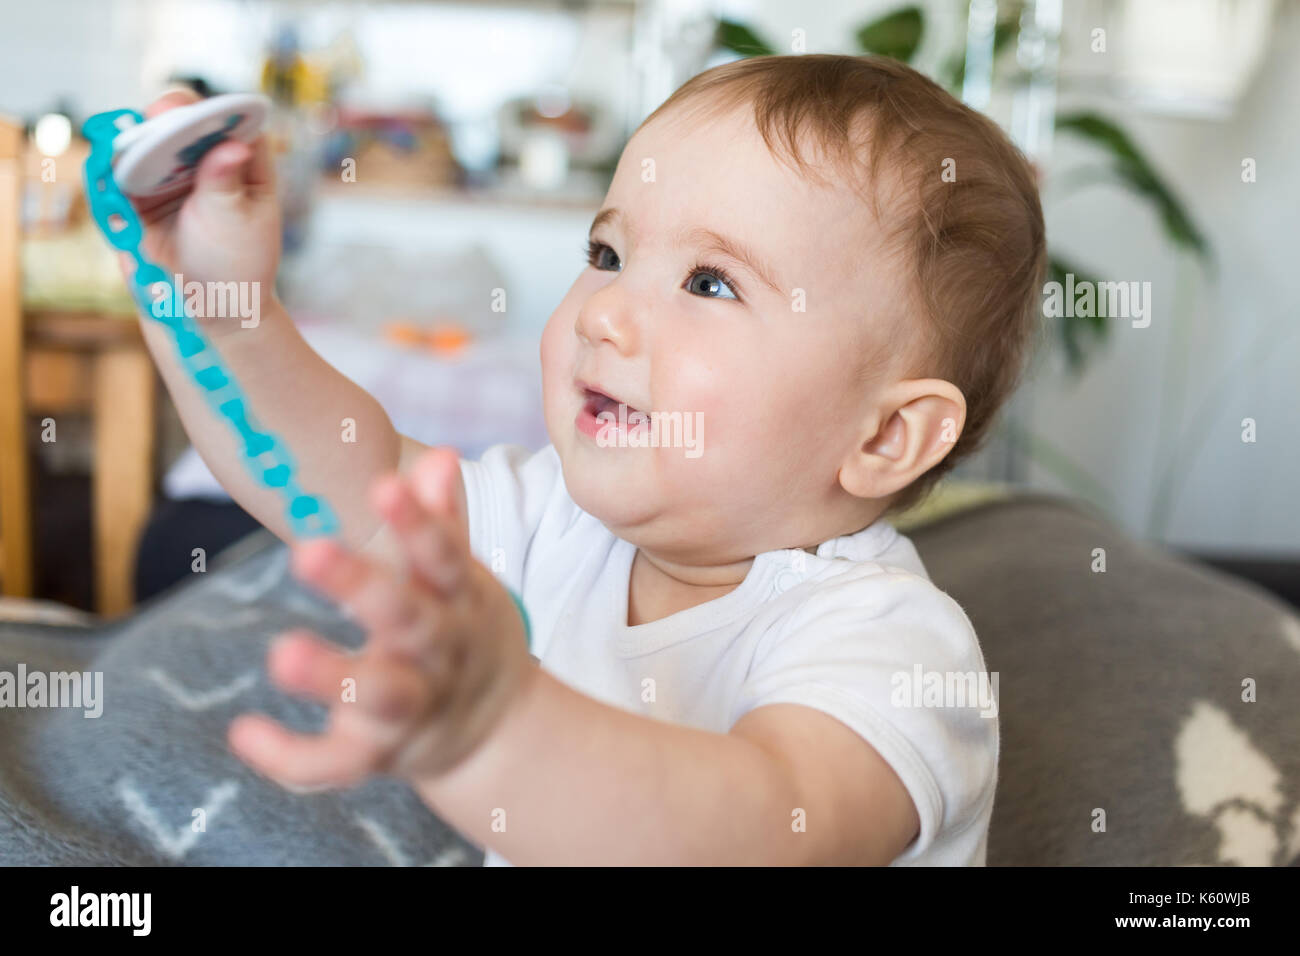 Cheerful little baby Playing with toy. Banque D'Images